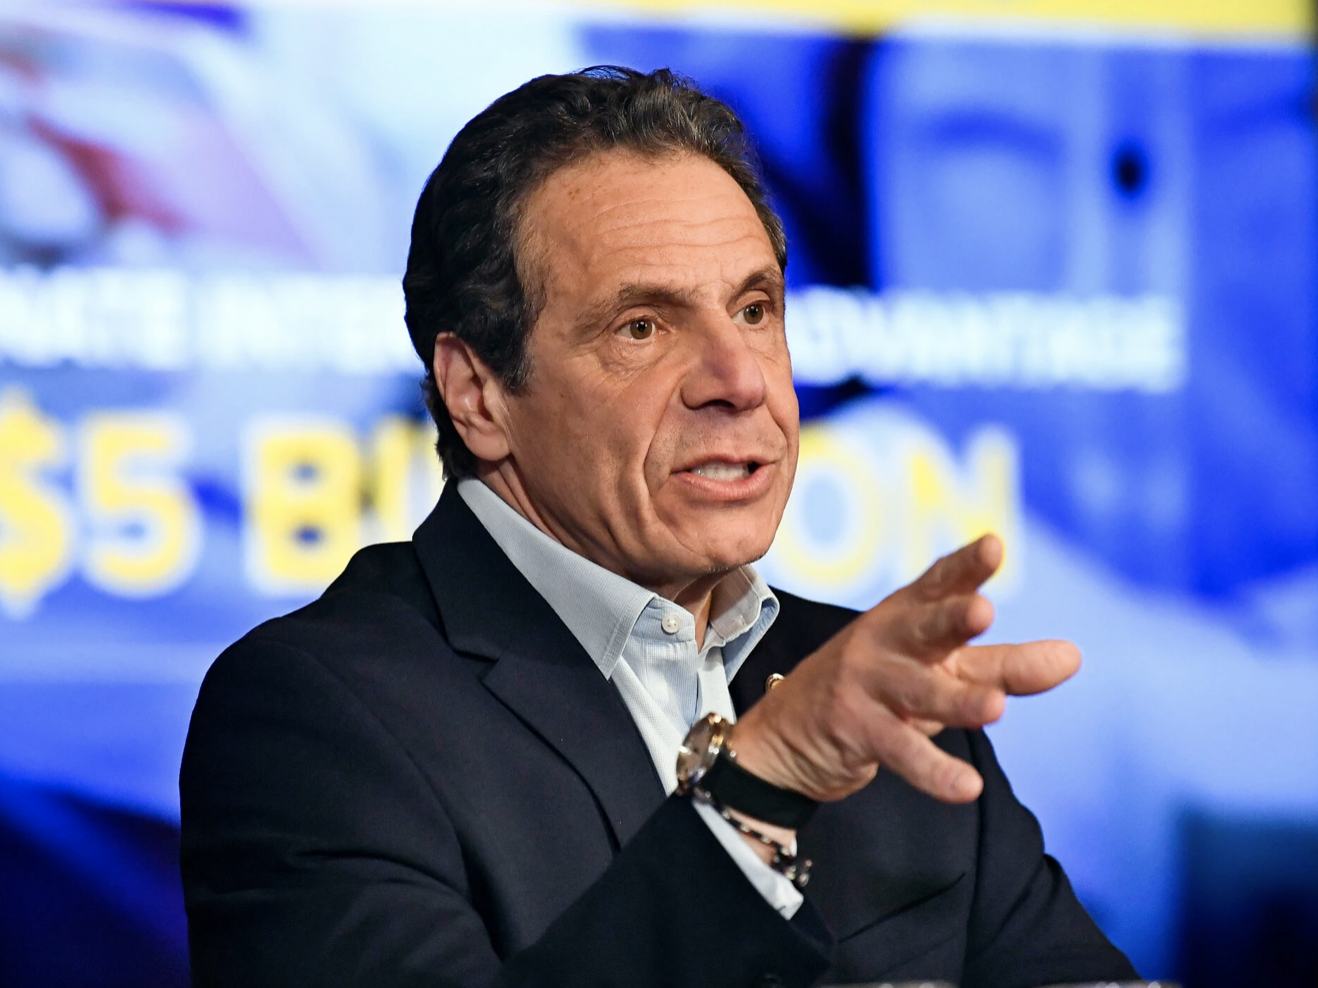 Aide Says Cuomo Groped Her as New Details of Account Emerge